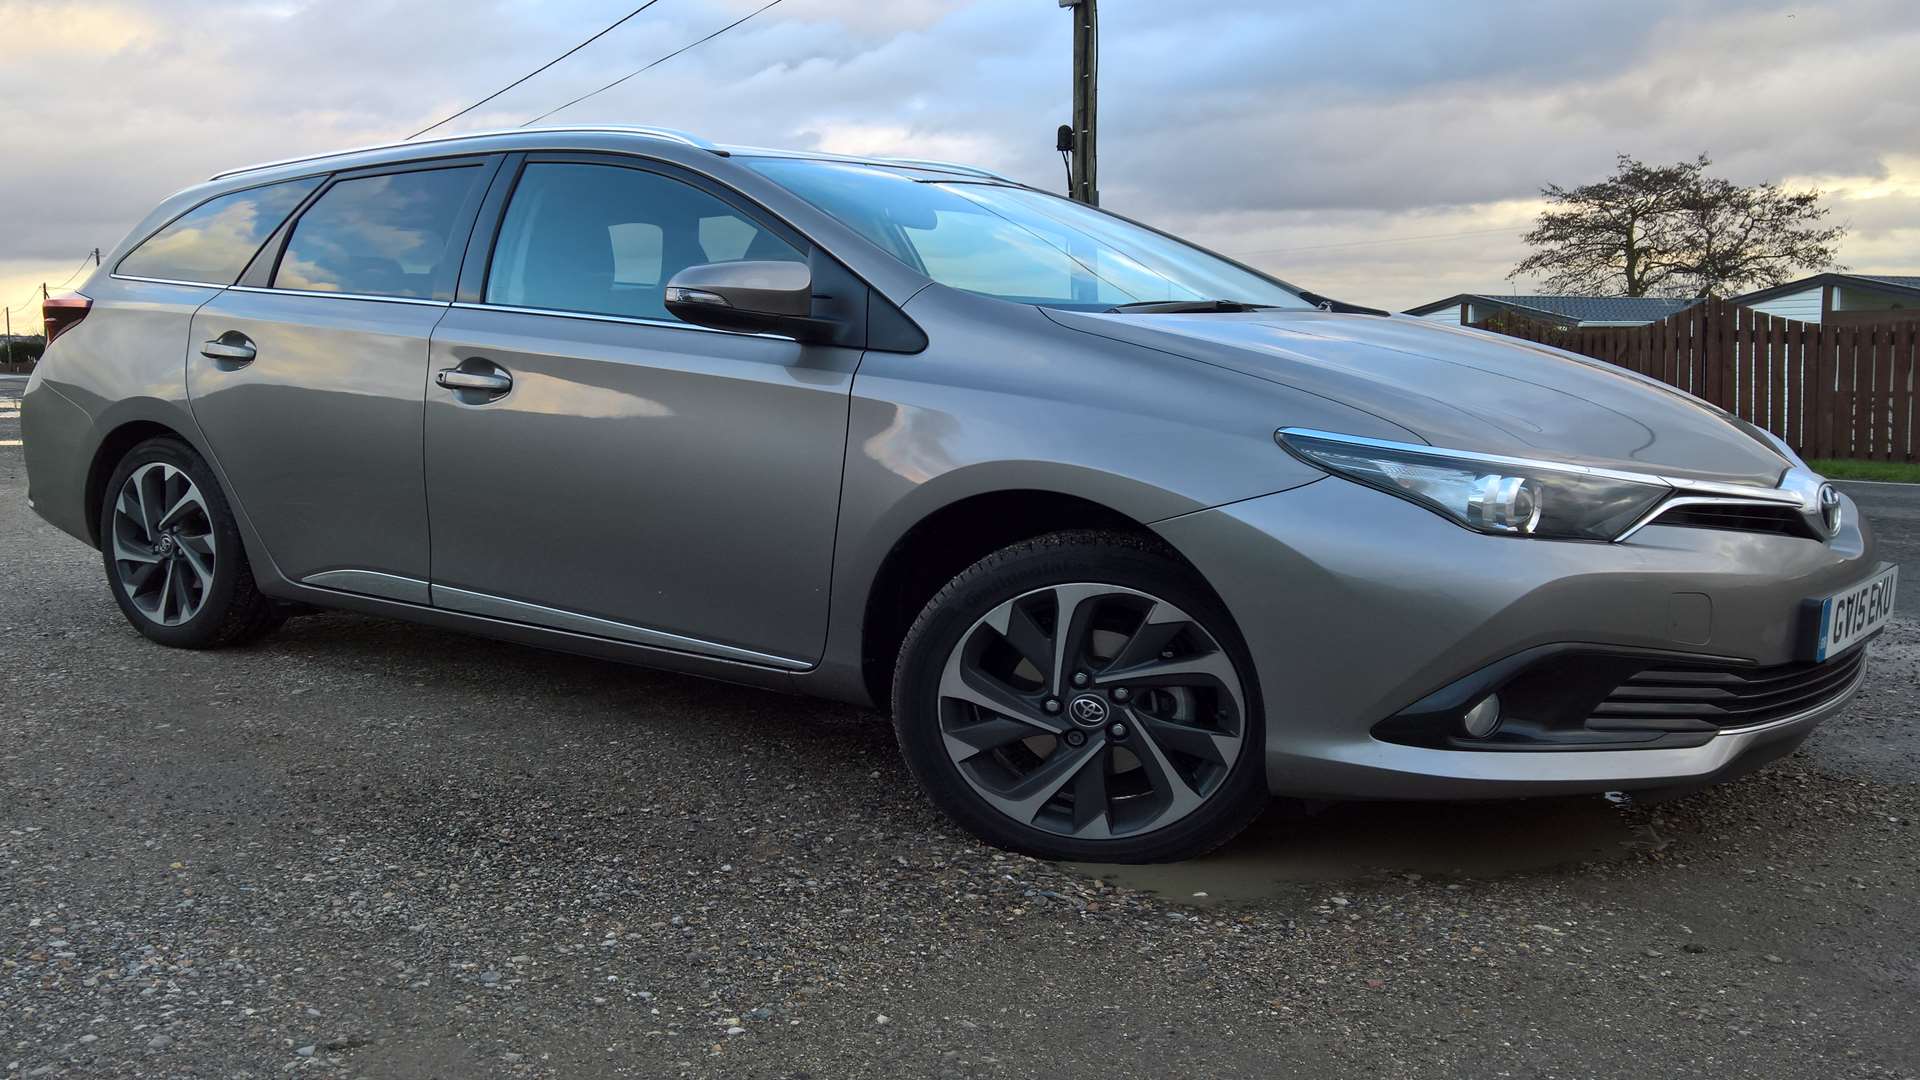 The Auris is the spiritual successor to the Corolla, the world's best-selling car